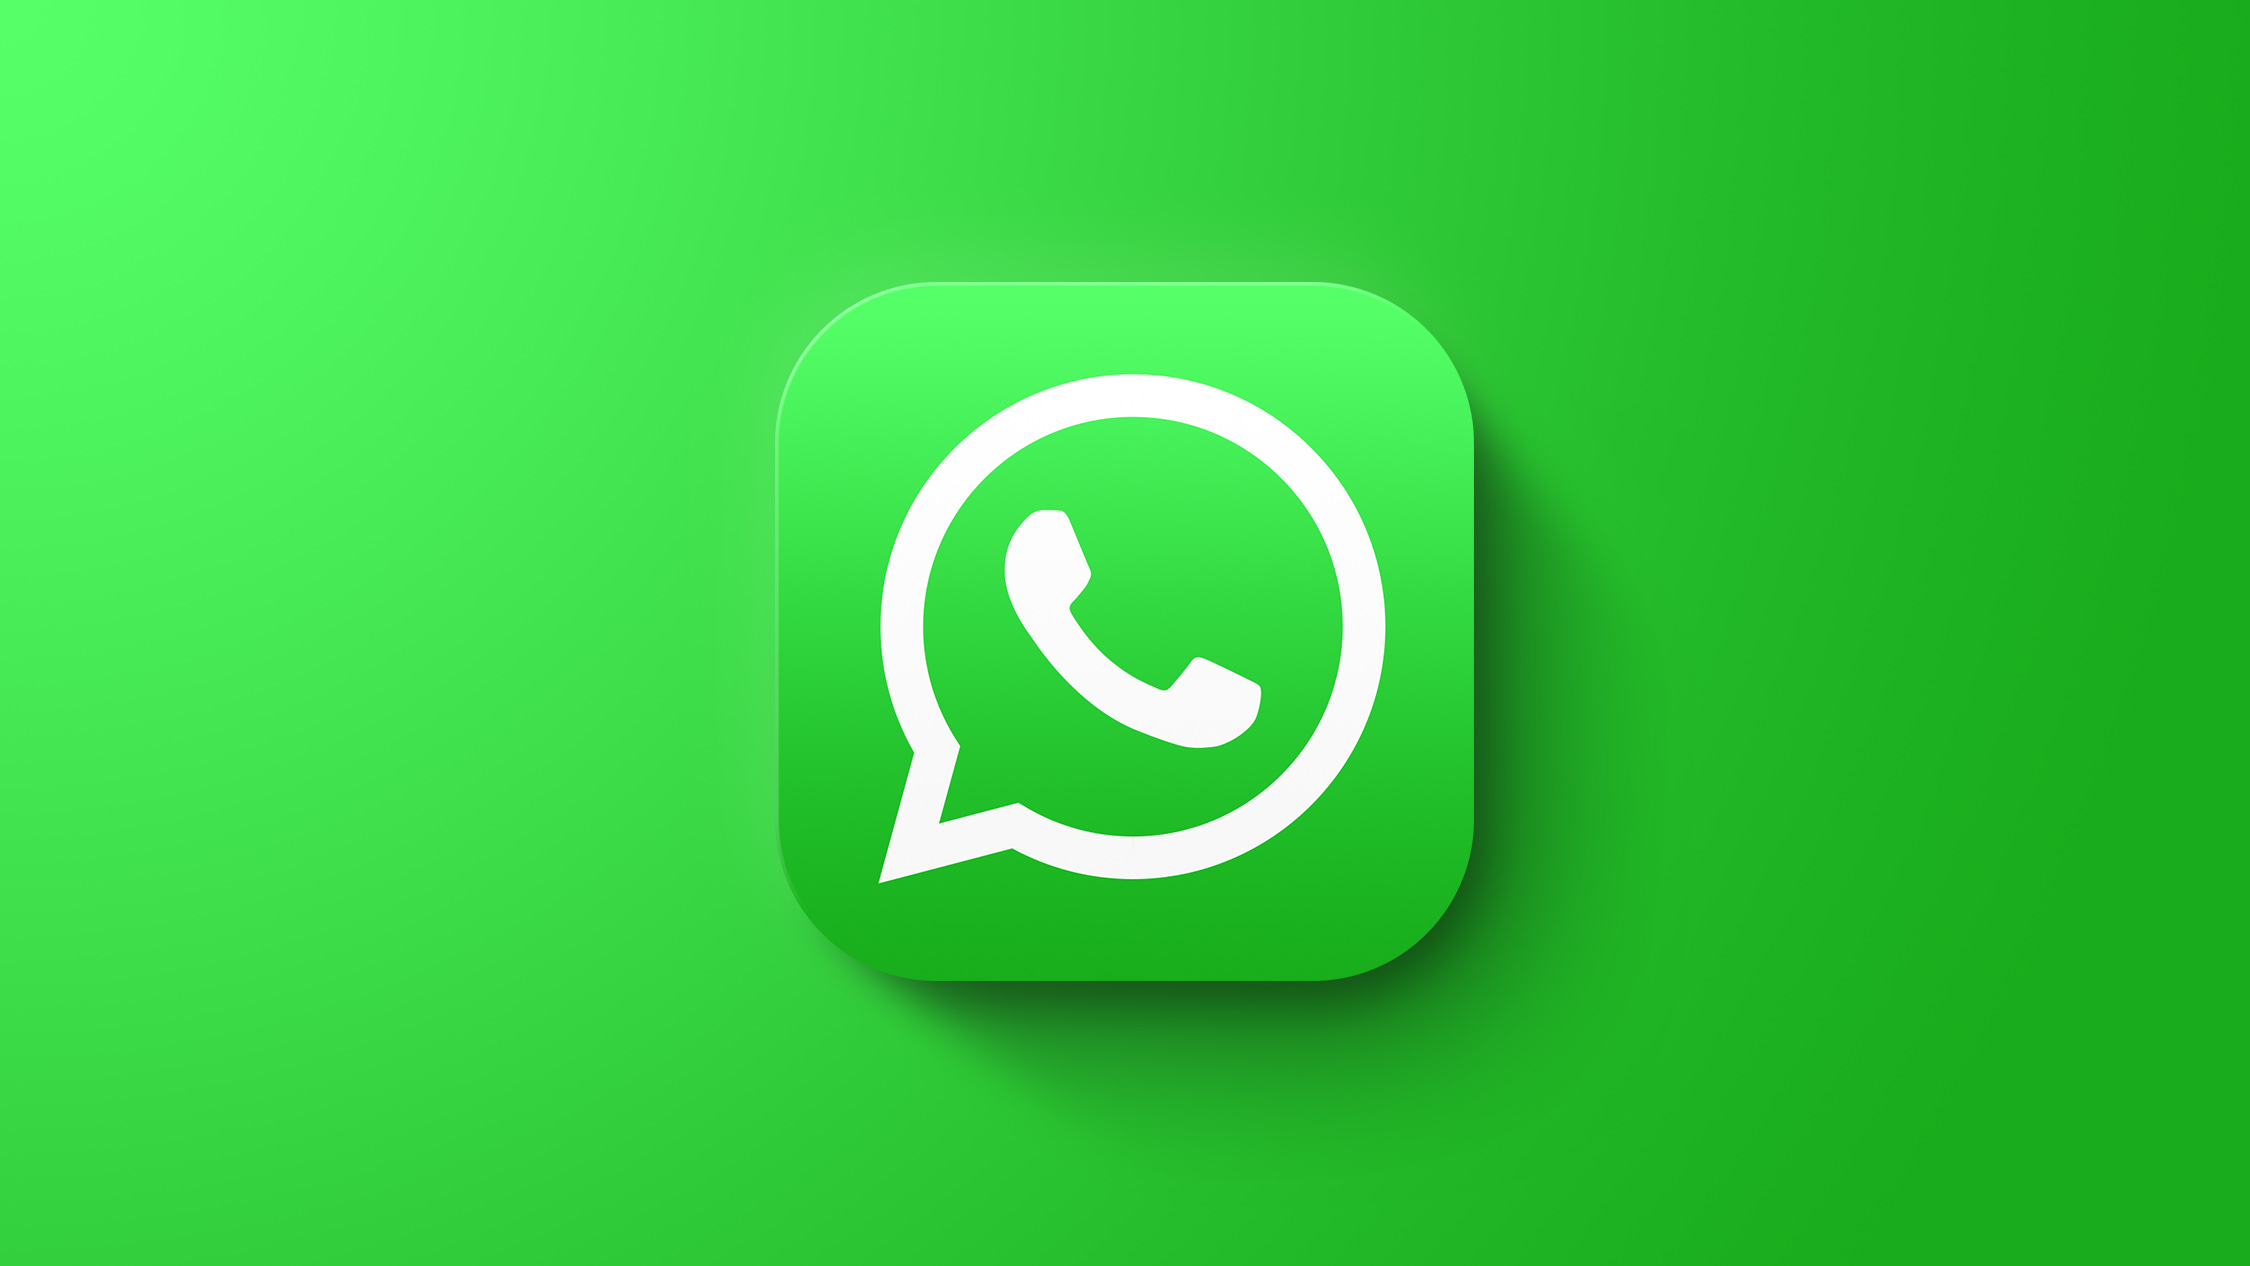 How to Use WhatsApp on Mac Without a Connected iPhone - MacRumors